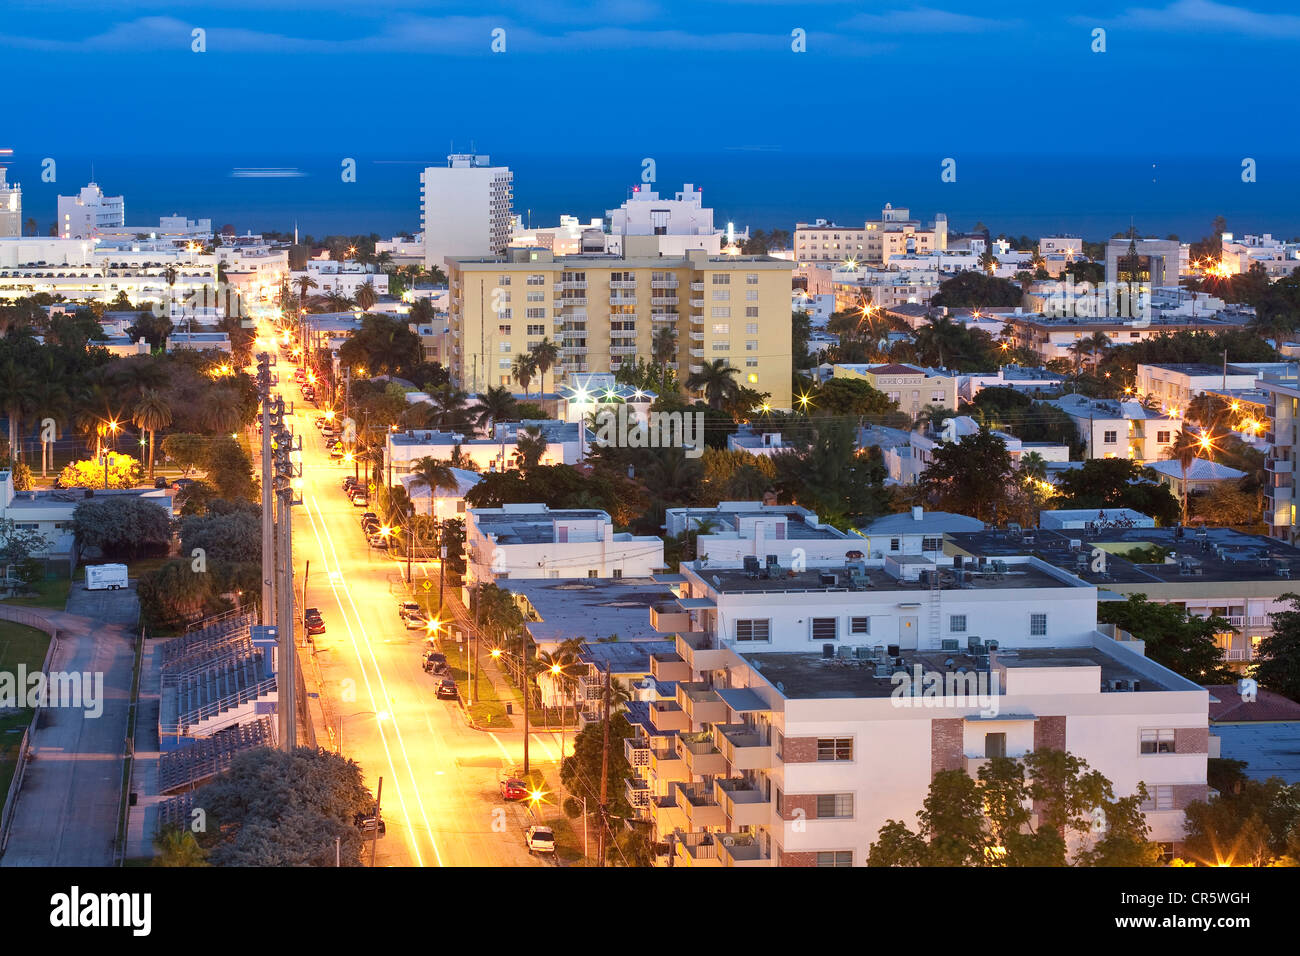 United States, Florida, Miami, view over South Beach and Atlantic Ocean at nightfall Stock Photo